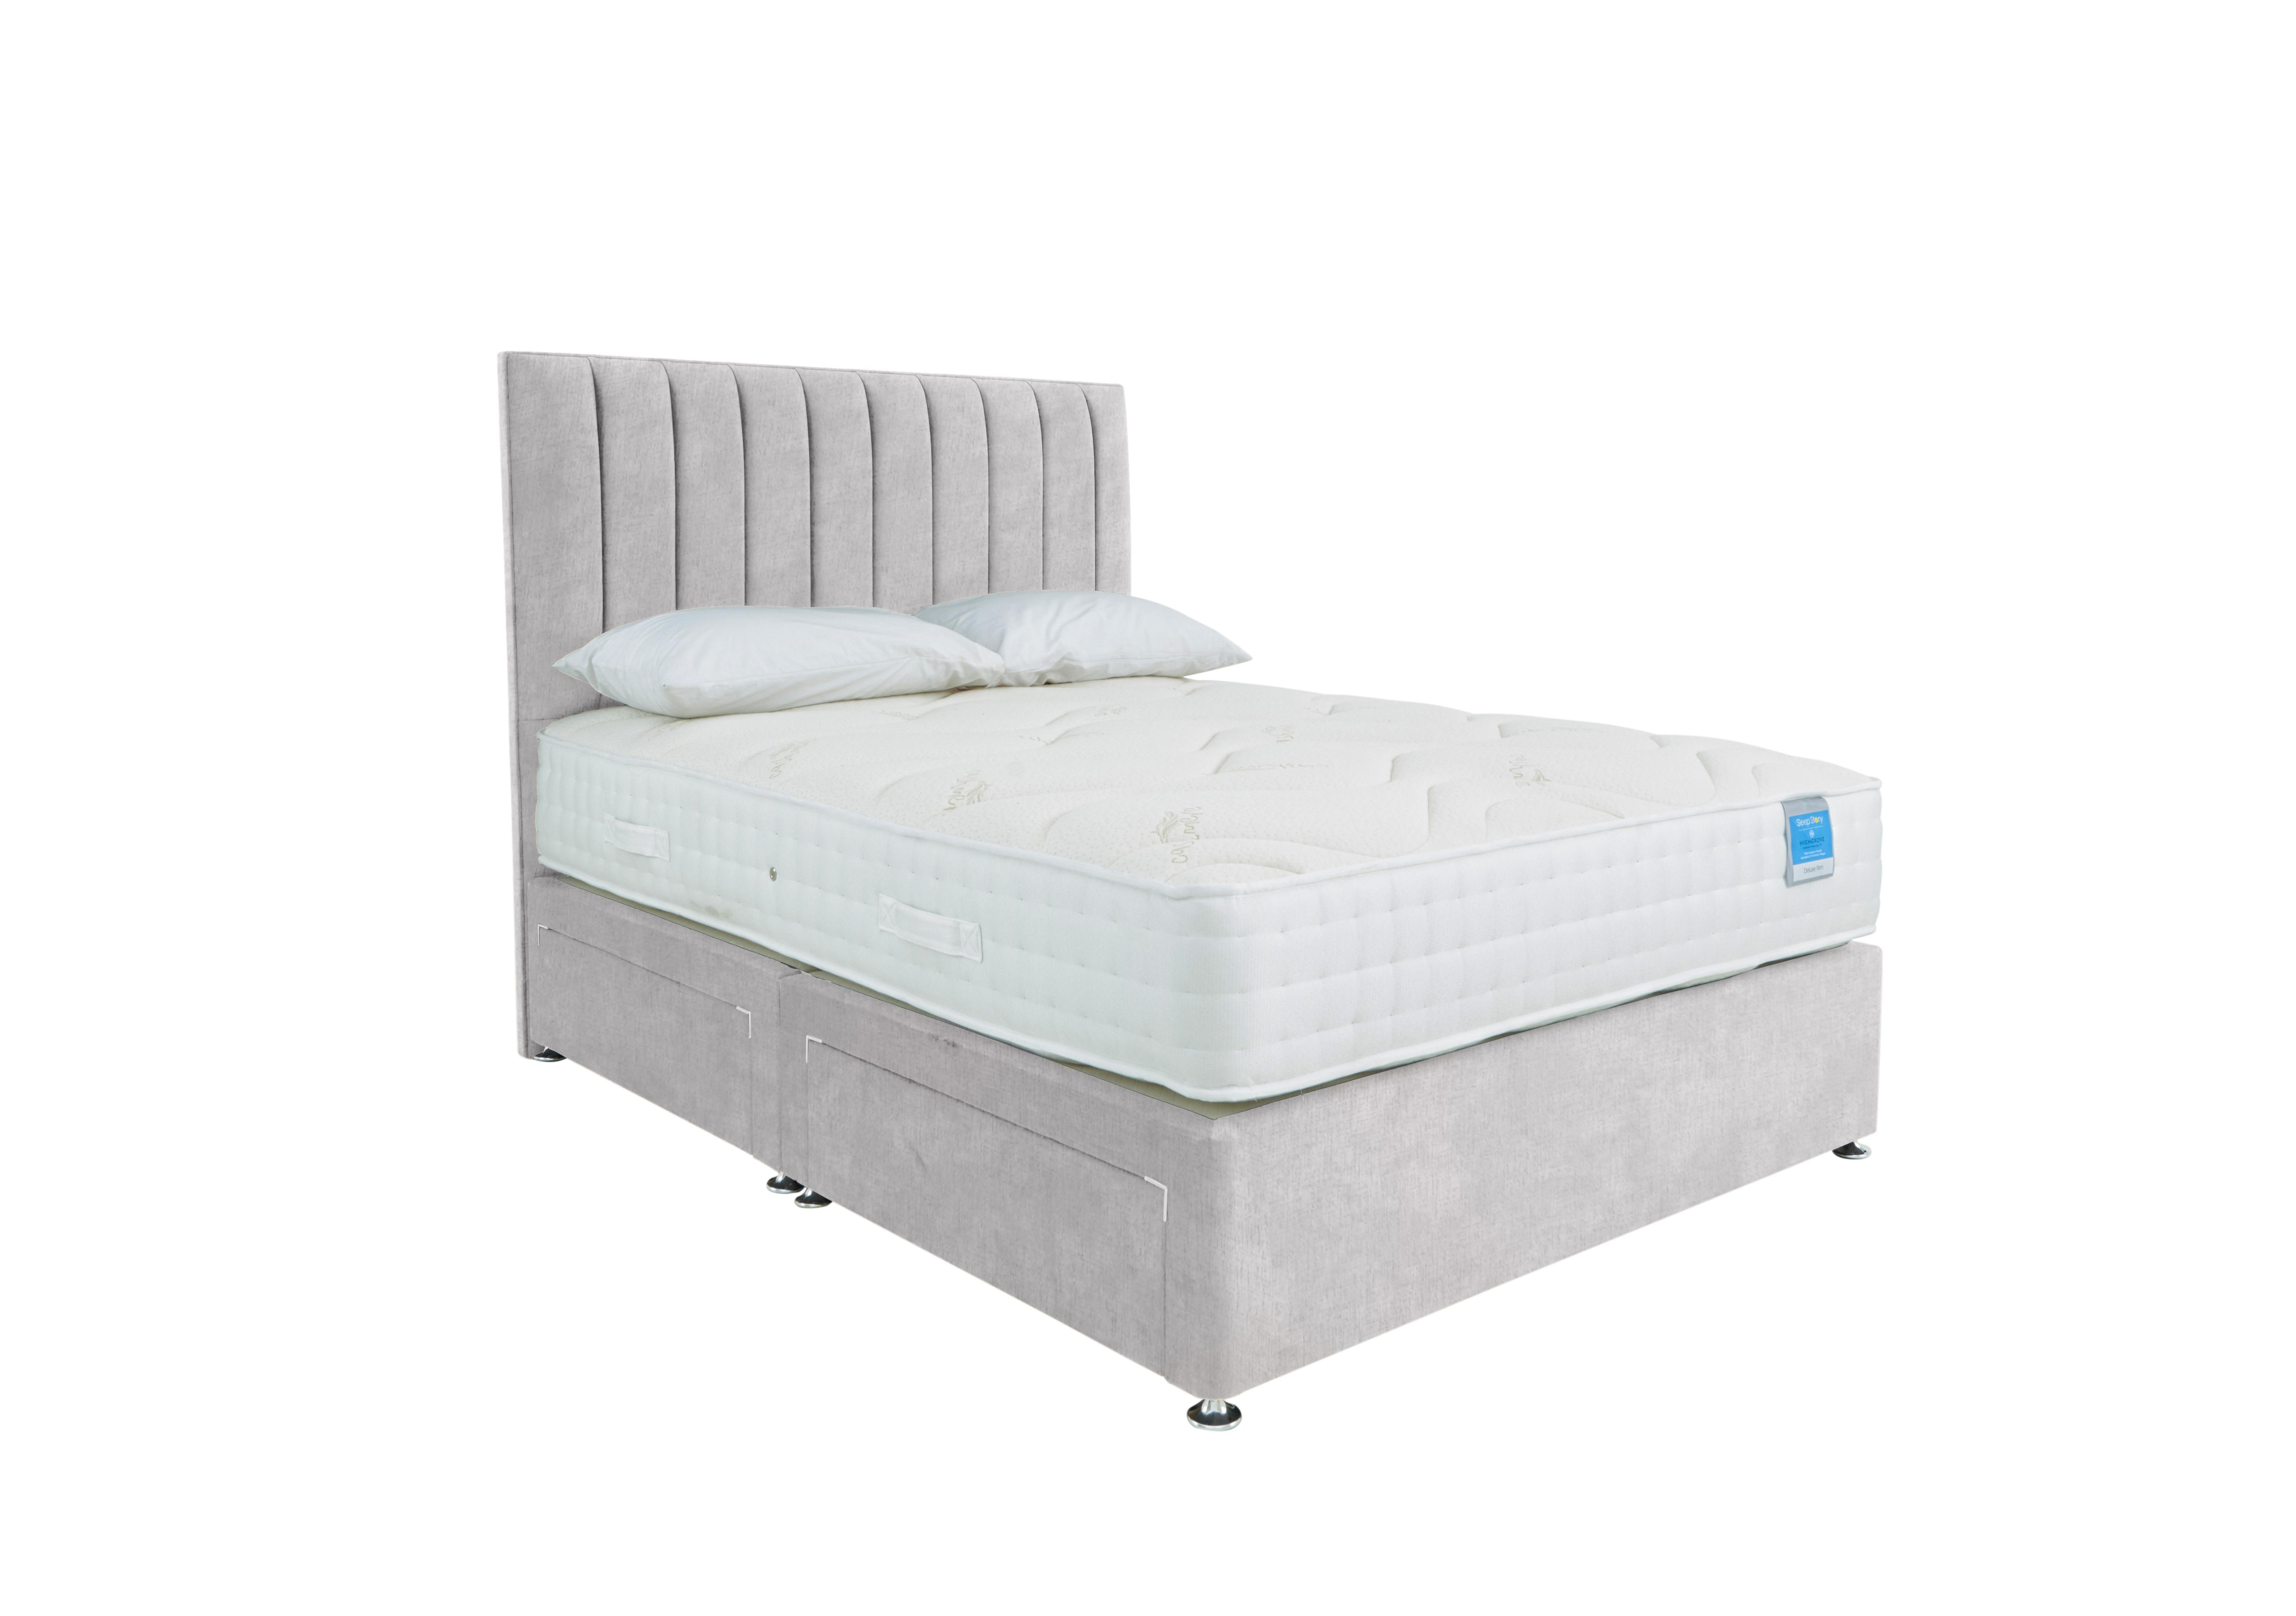 Deluxe Firm Divan Set in Lace Dolphin on Furniture Village